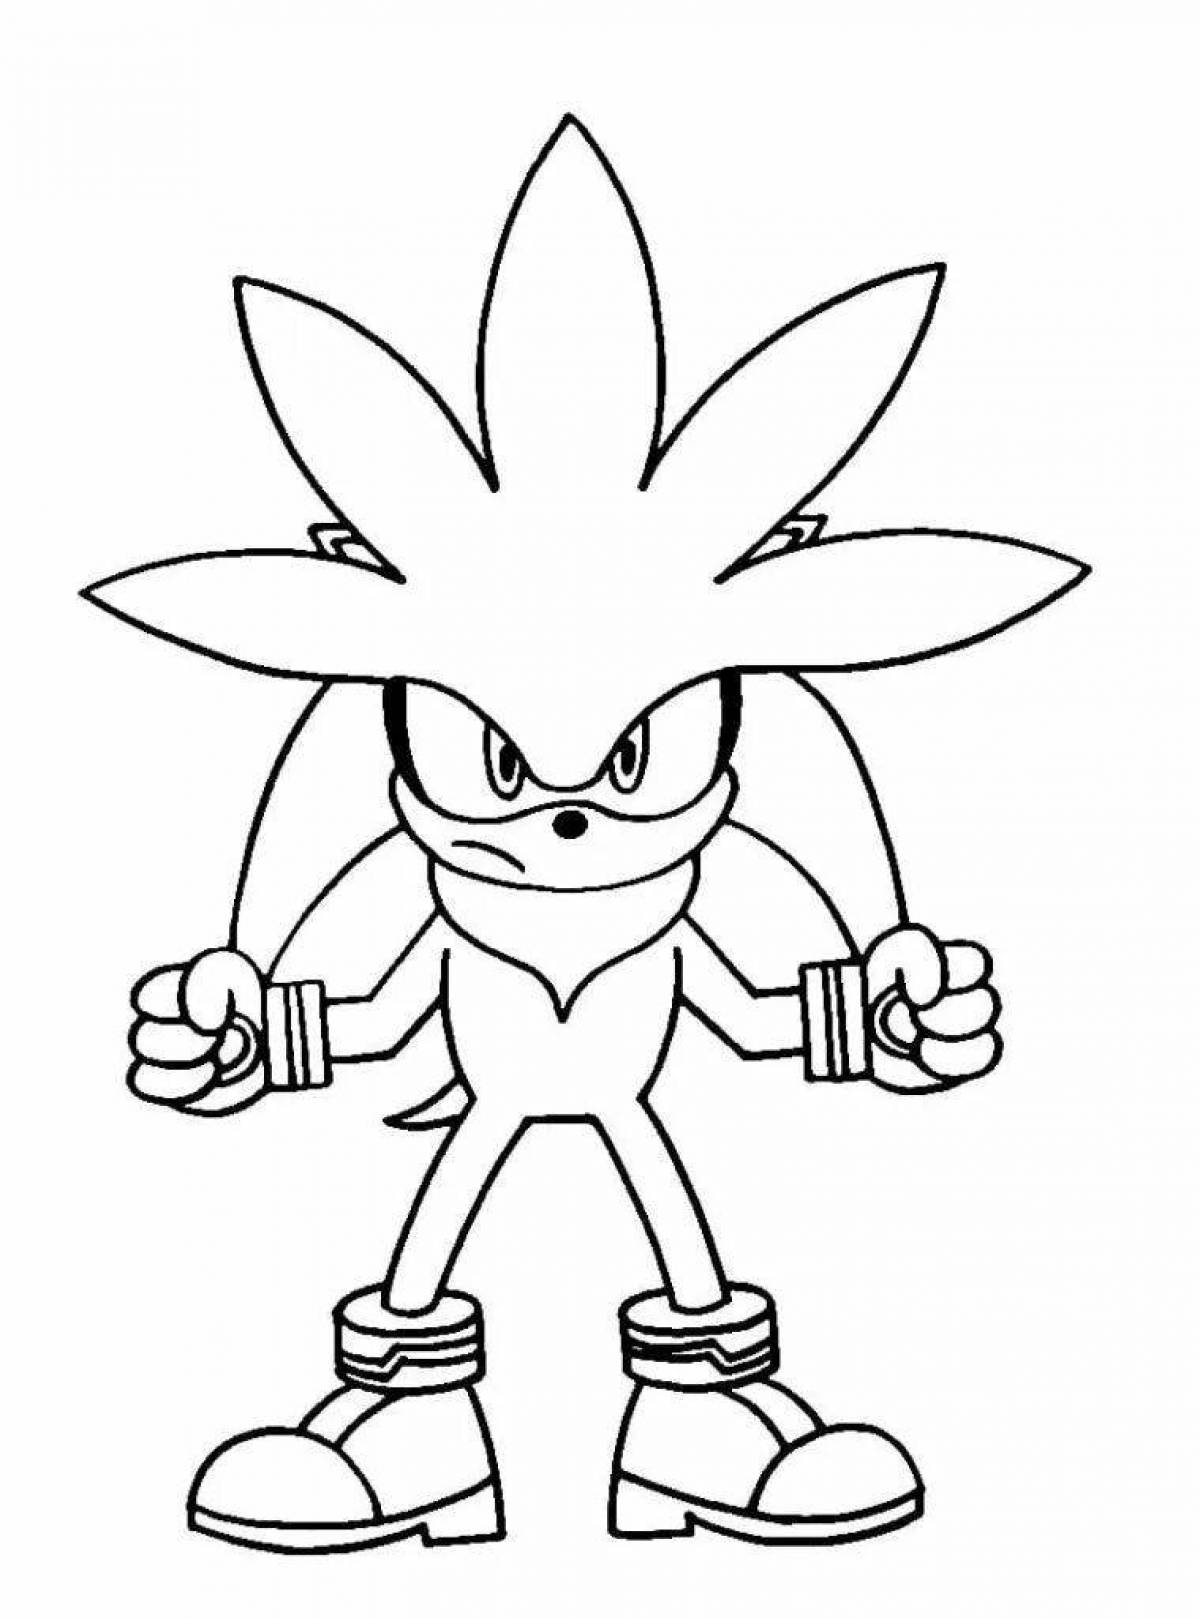 Dreamy blue sonic coloring page